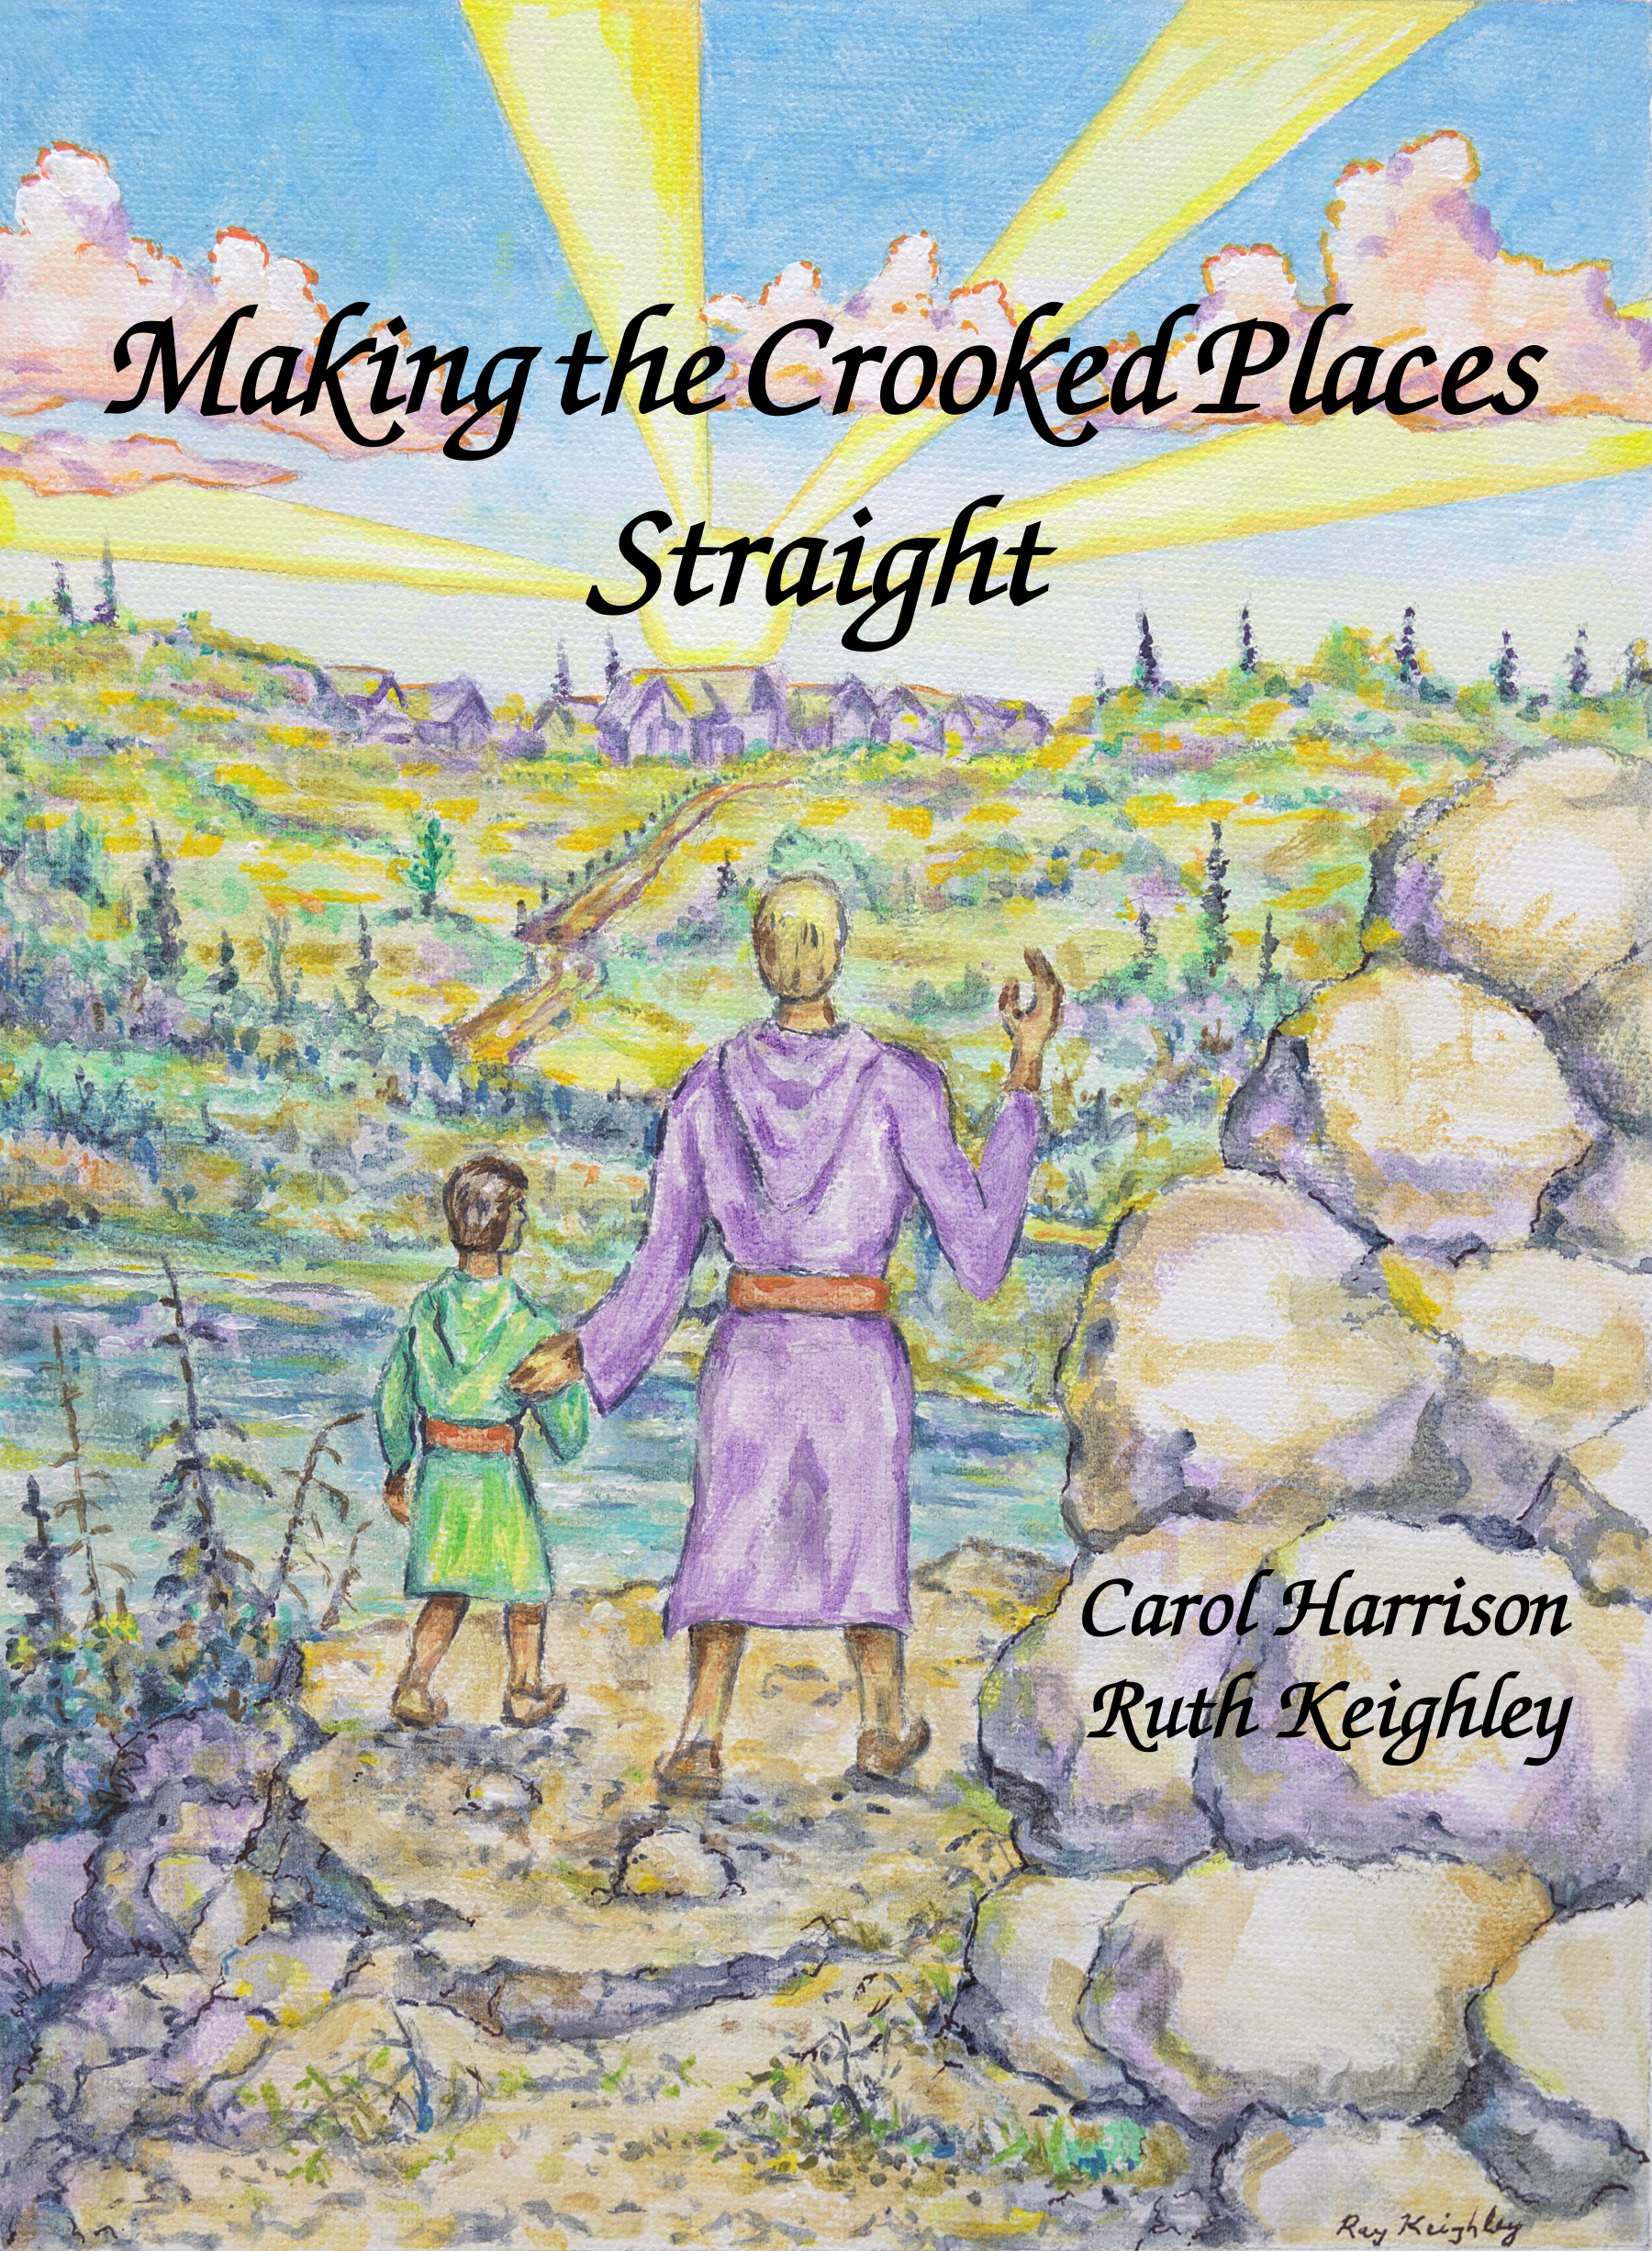 Book Cover of Making the Crooked Places Straight